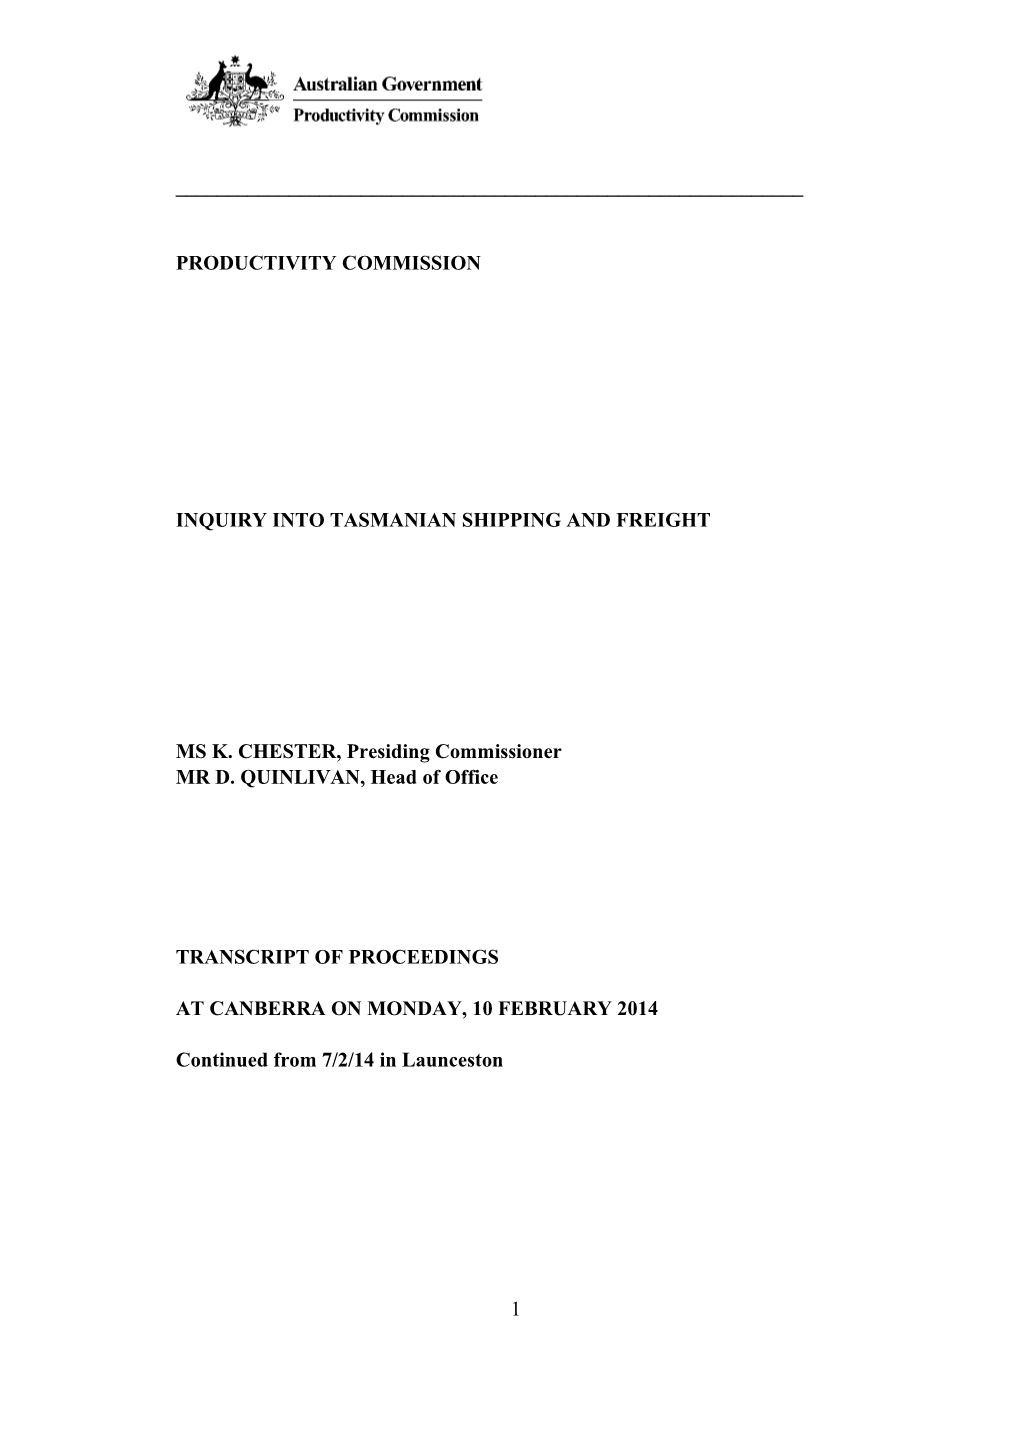 10 February 2014 - Canberra Public Hearing Transcript - Tasmanian Shipping and Freight